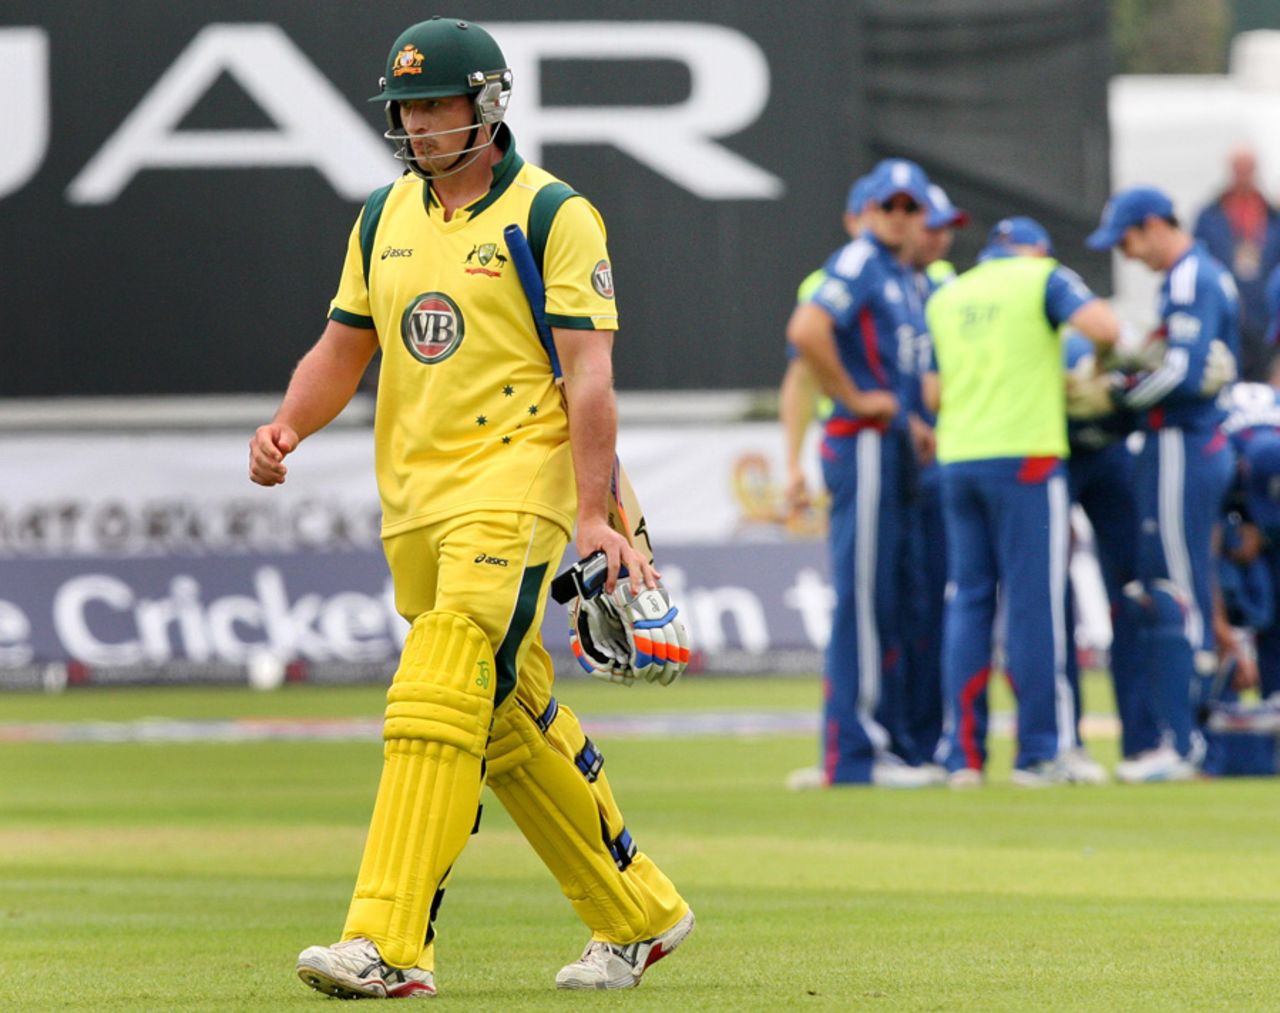 Peter Forrest departed for a first-ball duck, England v Australia, 4th ODI, Chester-le-Street, July 7, 2012